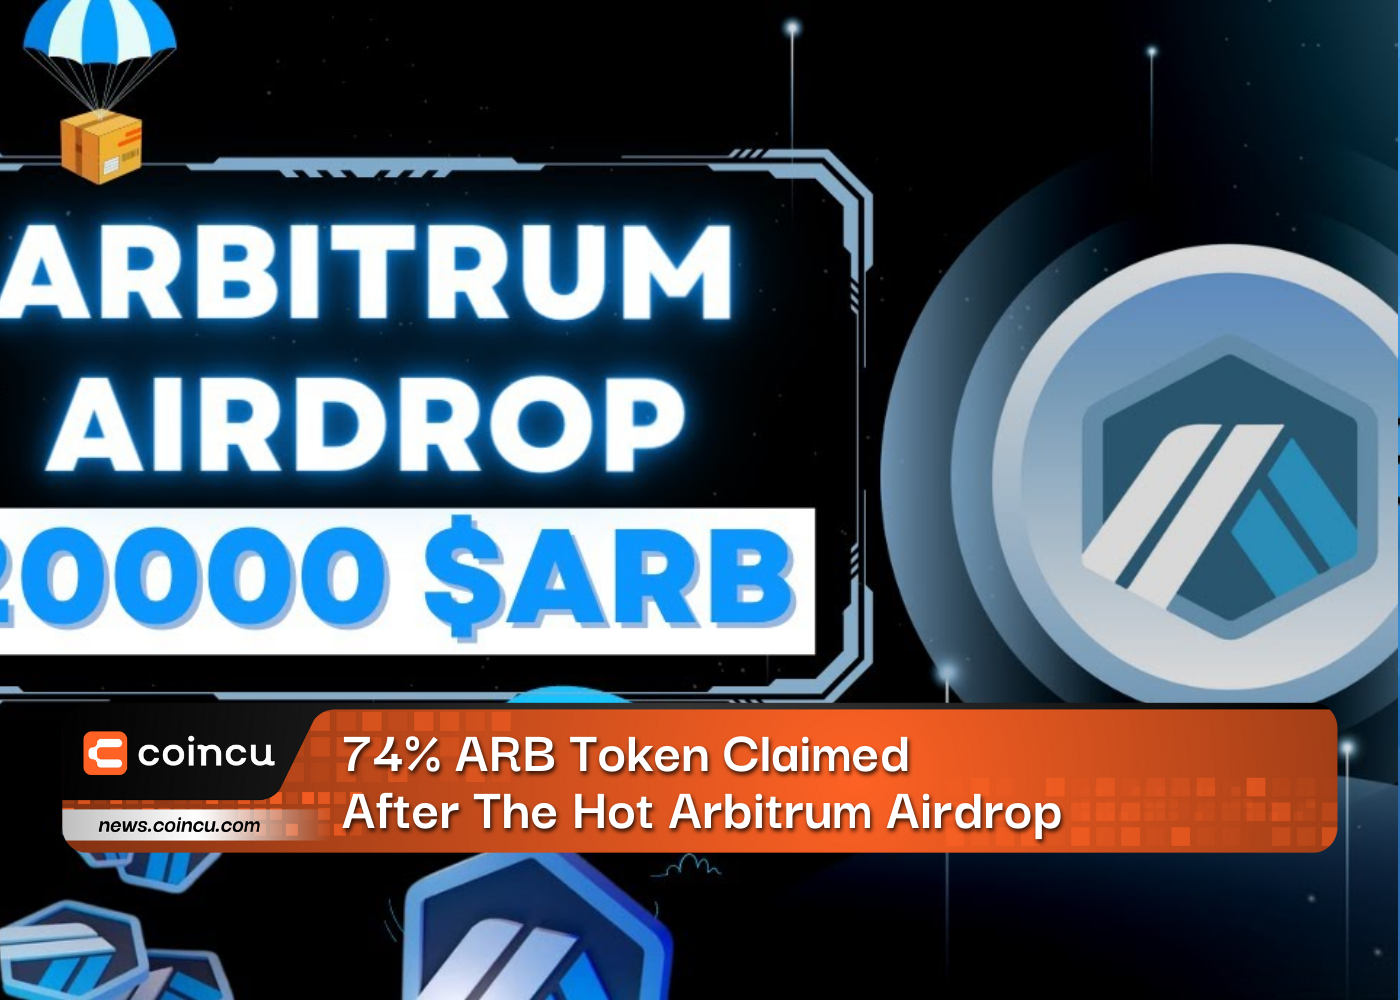 74% ARB Token Claimed After The Hot Arbitrum Airdrop